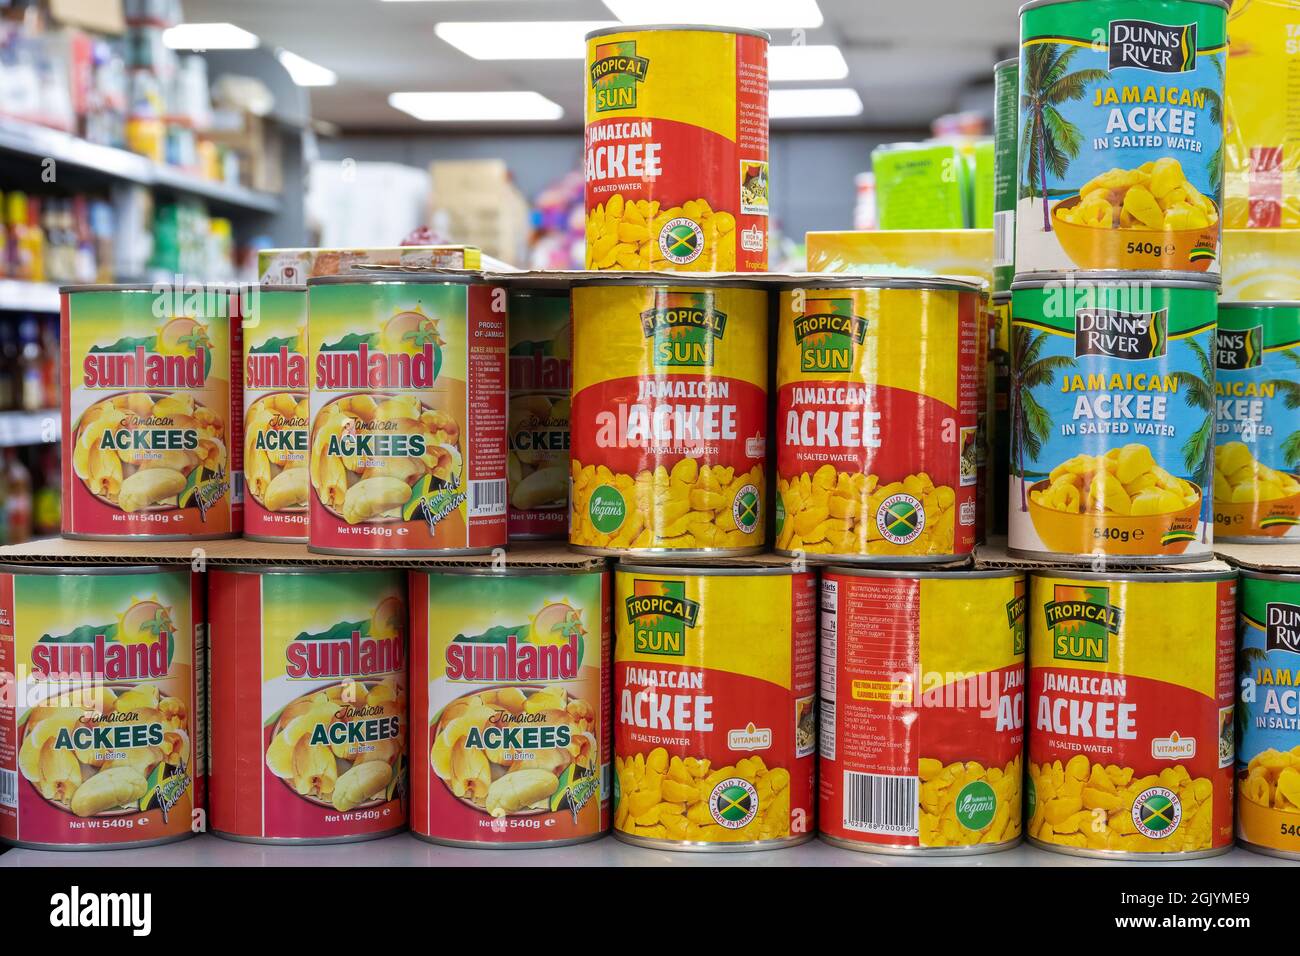 London, England - September 11 2021: Variety of tinned ackee on sale in a shop in London Stock Photo